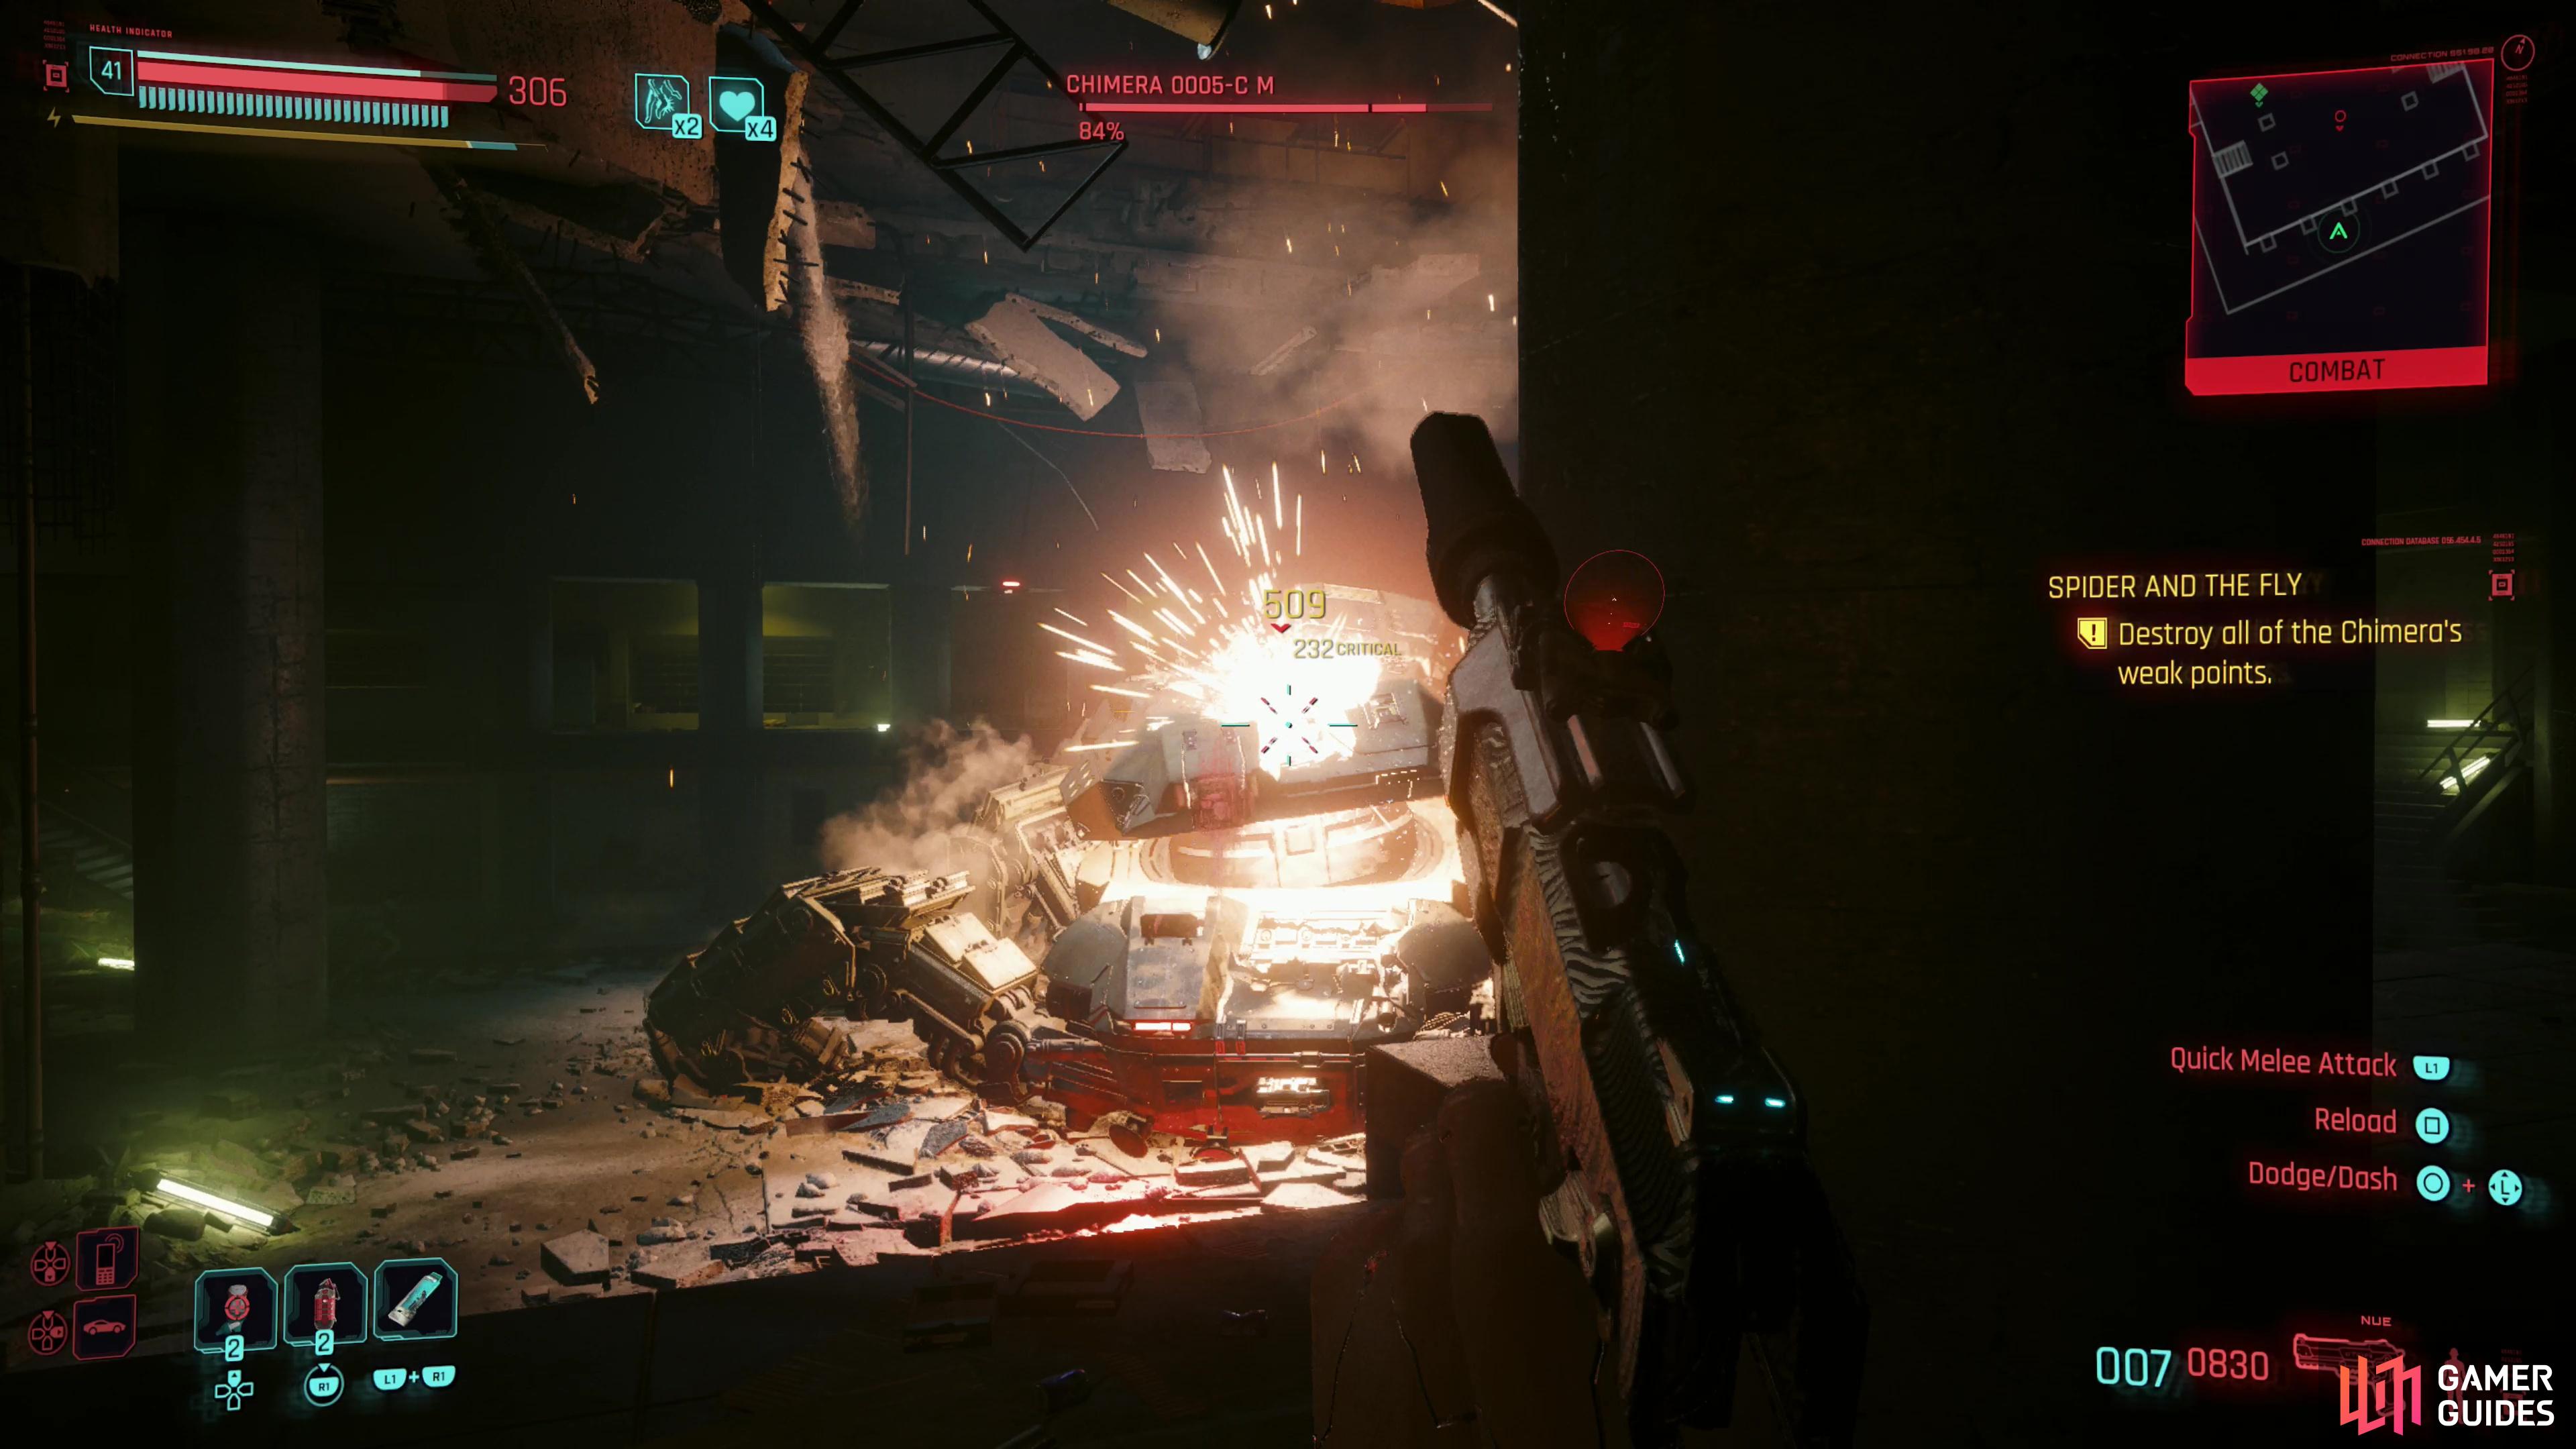 During the first phase of fight you’ll be incentivized to target weakpoints that appear on the Chimera’s hull.